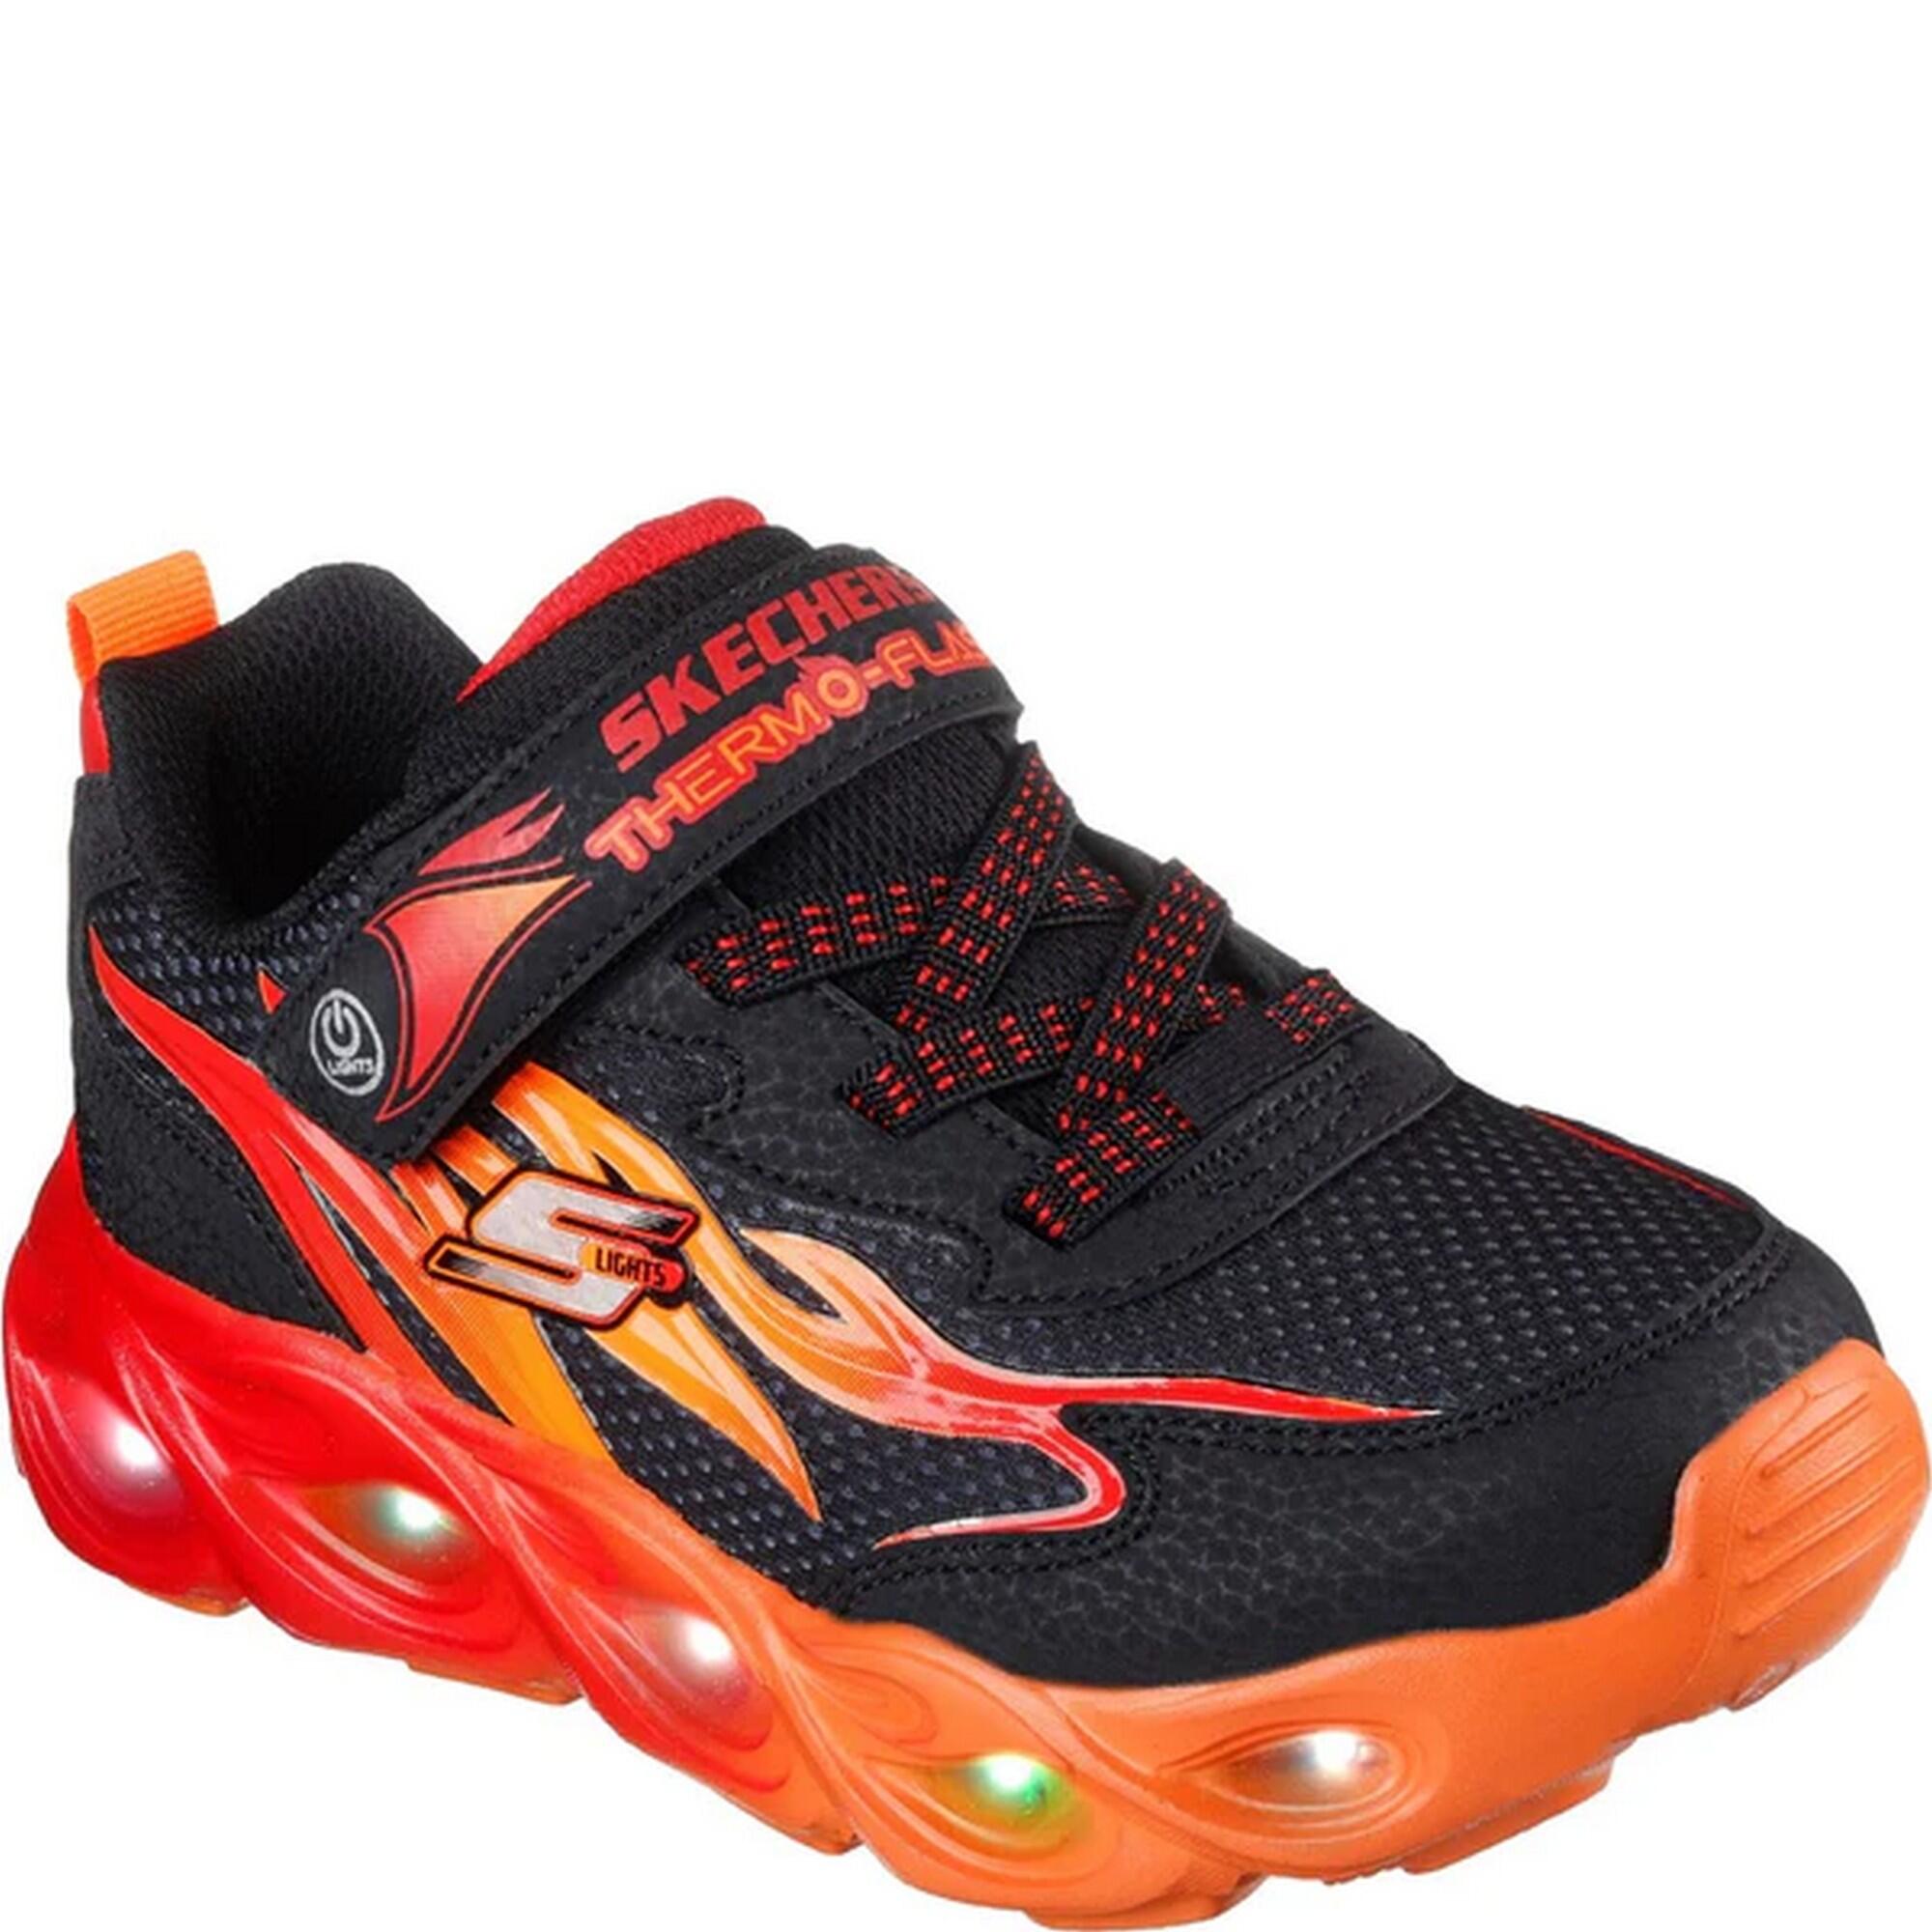 SKECHERS Boys SLights Thermo Flash Heat Flux Trainers (Black/Red)